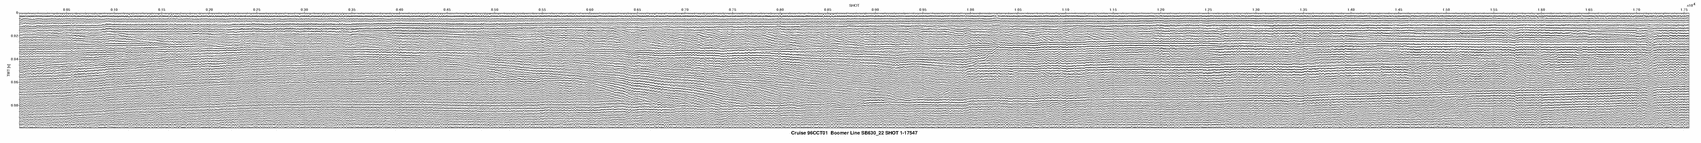 SB630_22 seismic profile thumbnail image with link to full size image